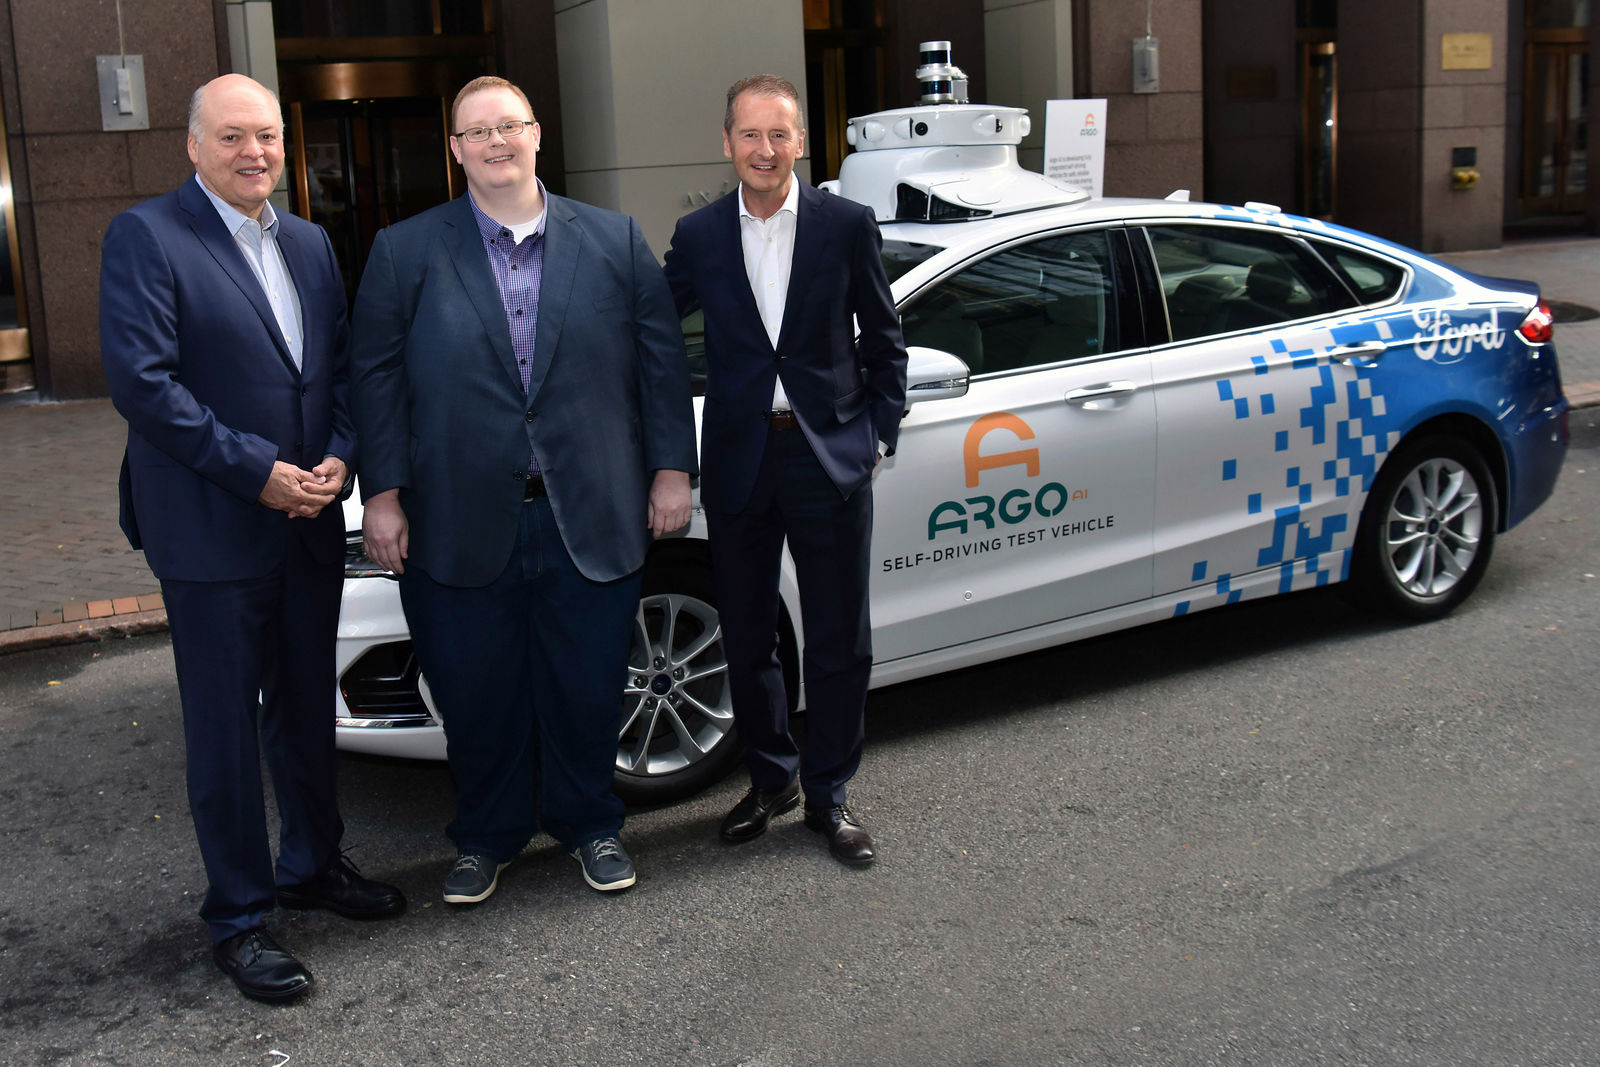 Ford – Volkswagen expand their global collaboration to advance autonomous driving, electrification and better serve customers